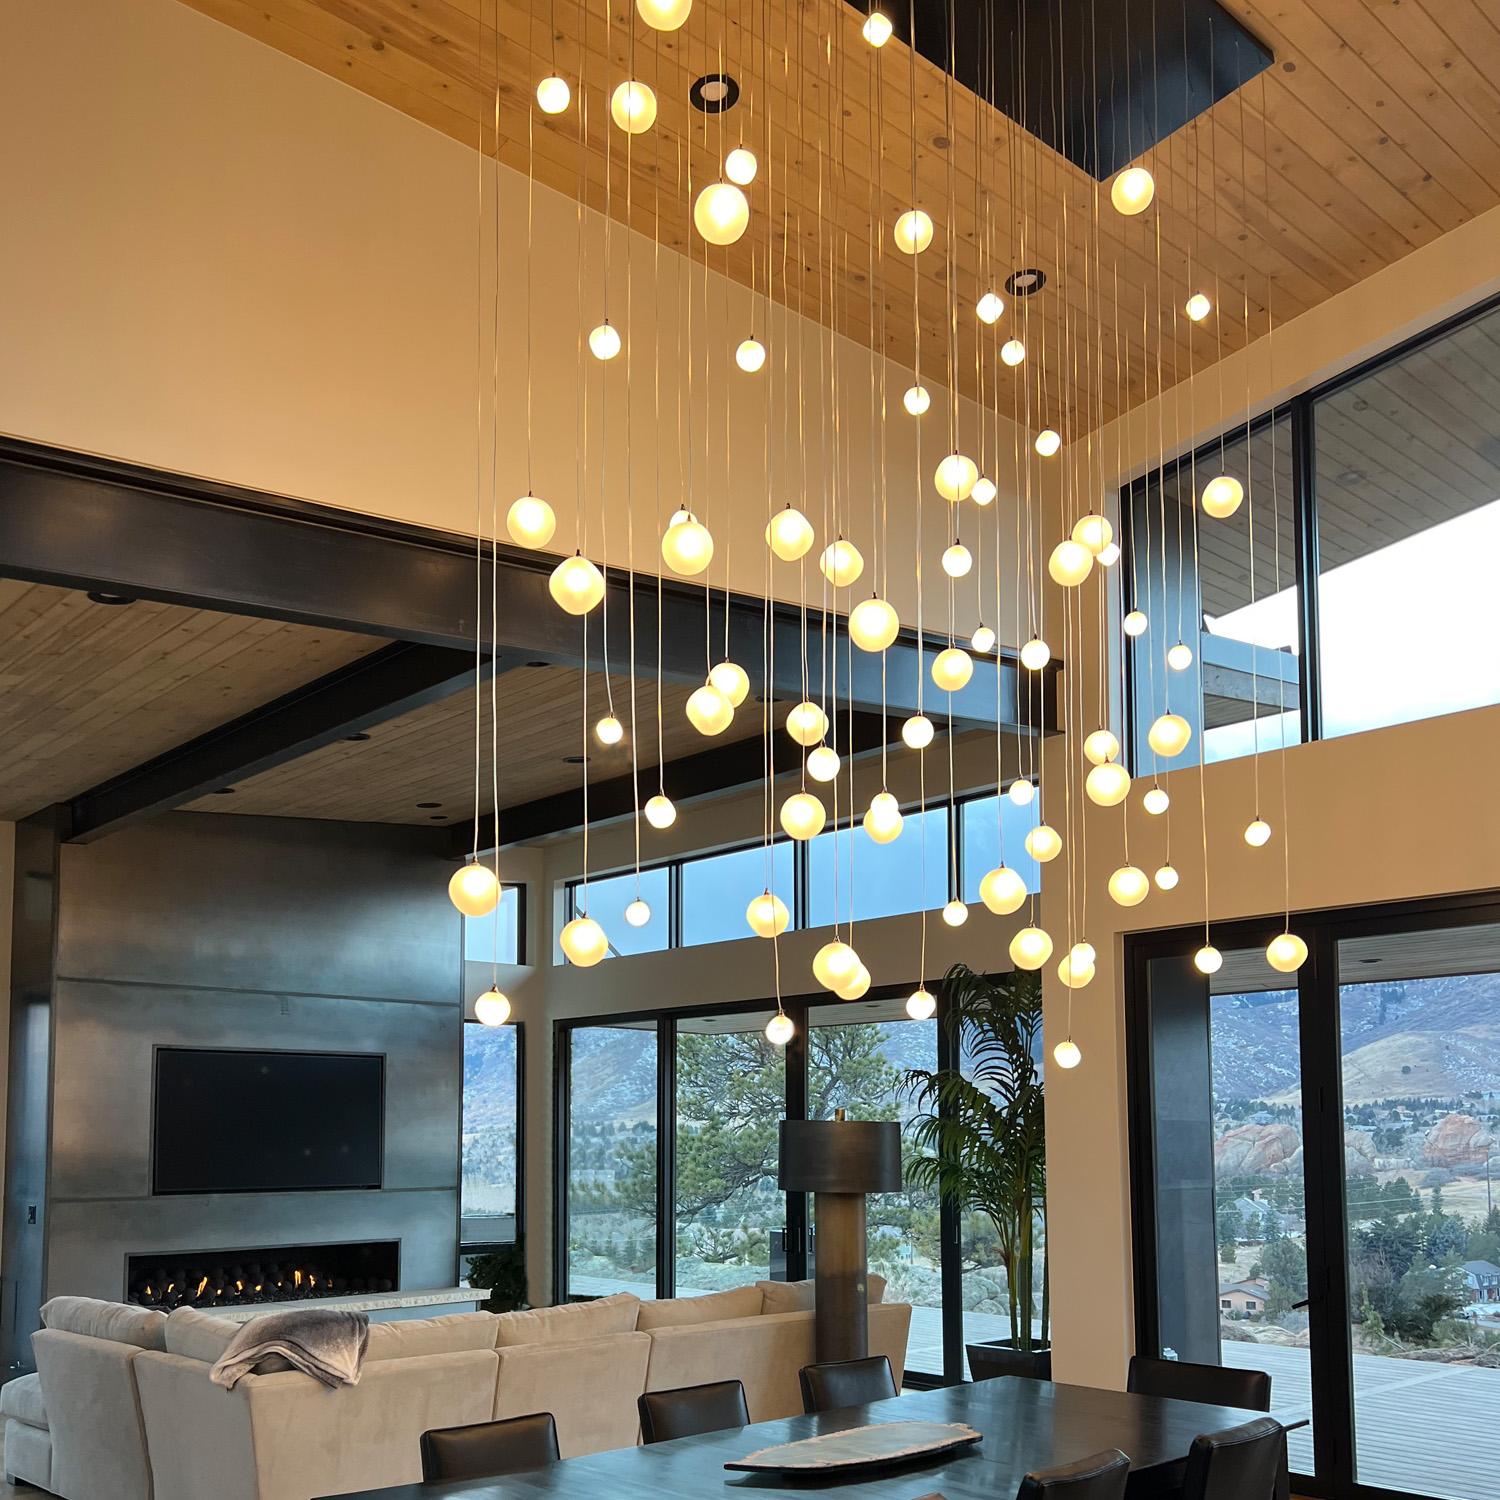 Introducing the Voyage cluster asymmetrical pendant chandelier - a stunning addition to any modern home or commercial space. This hand-blown artisanal glass light fixture boasts a unique design that is sure to capture the attention of all who enter